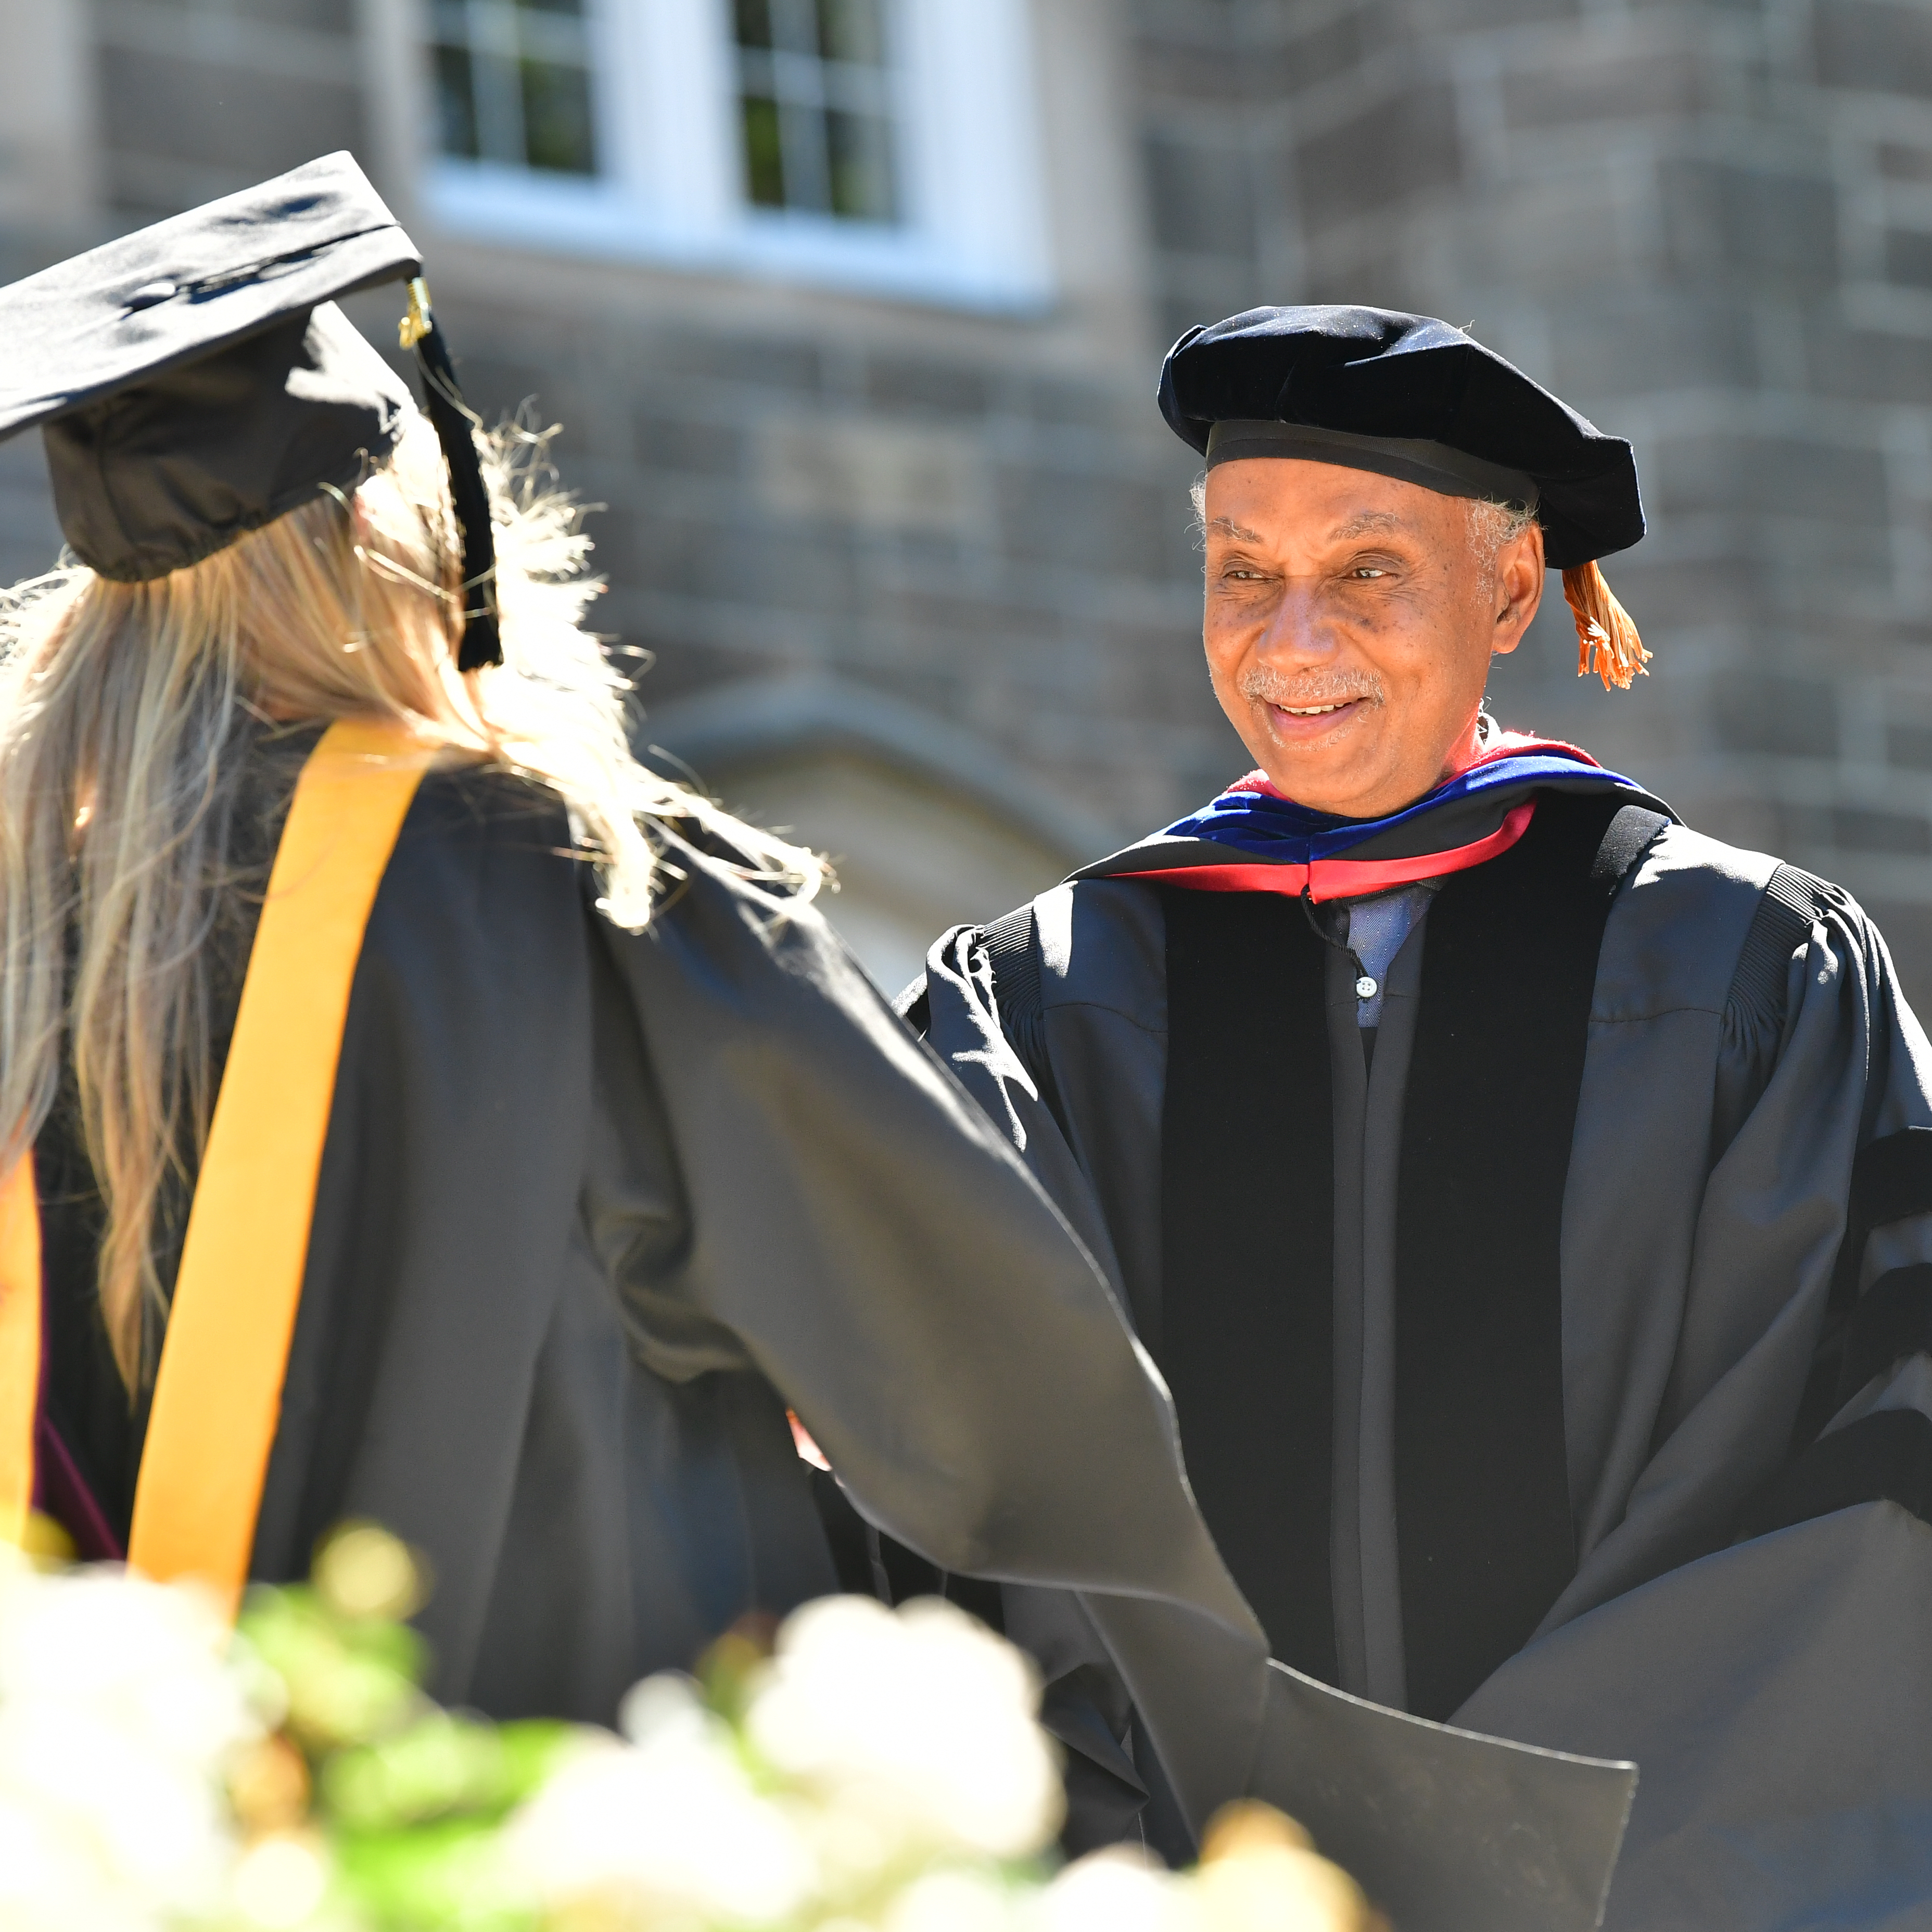 Tyler Stovall shaking hands with a graduating student at a commencement ceremony